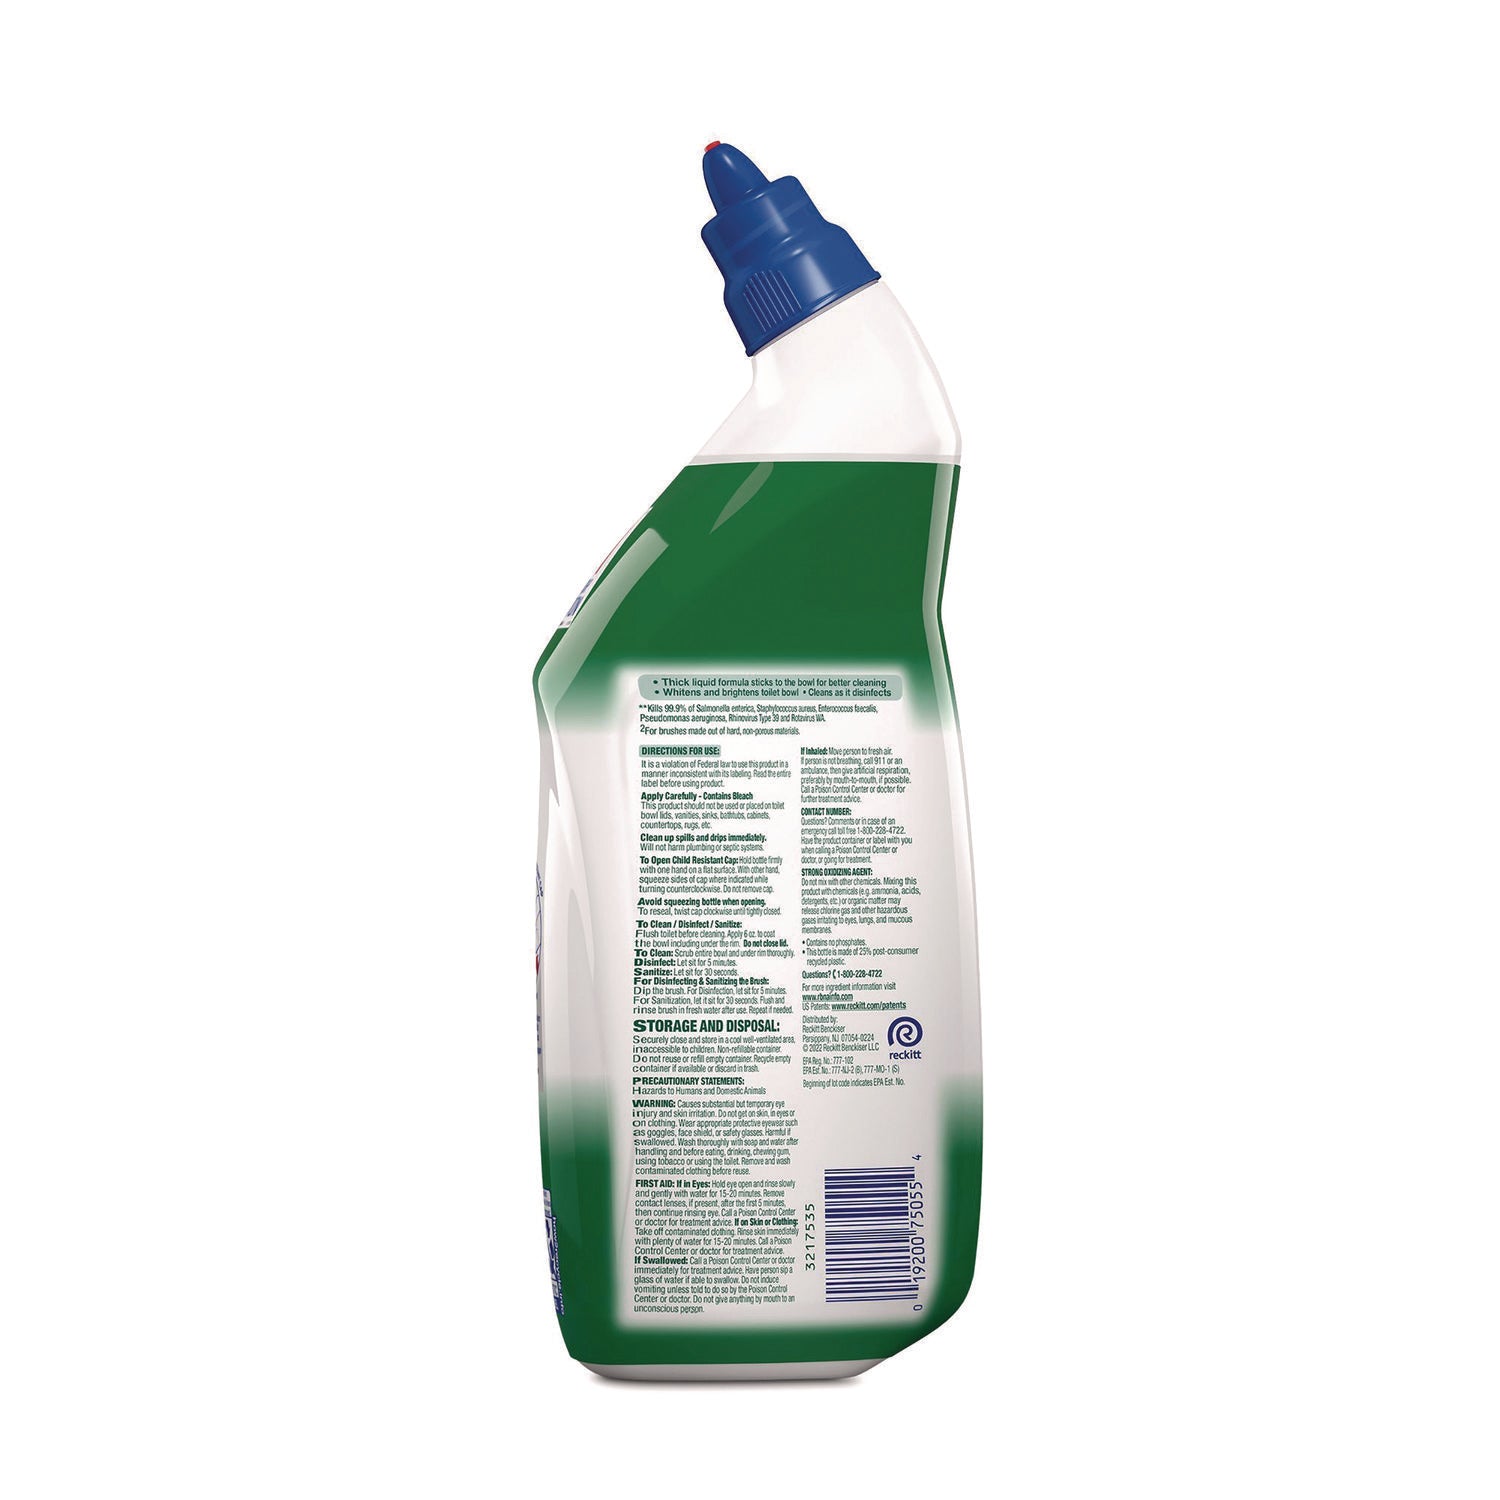 disinfectant-toilet-bowl-cleaner-with-bleach-24-oz-9-carton_rac98014 - 3